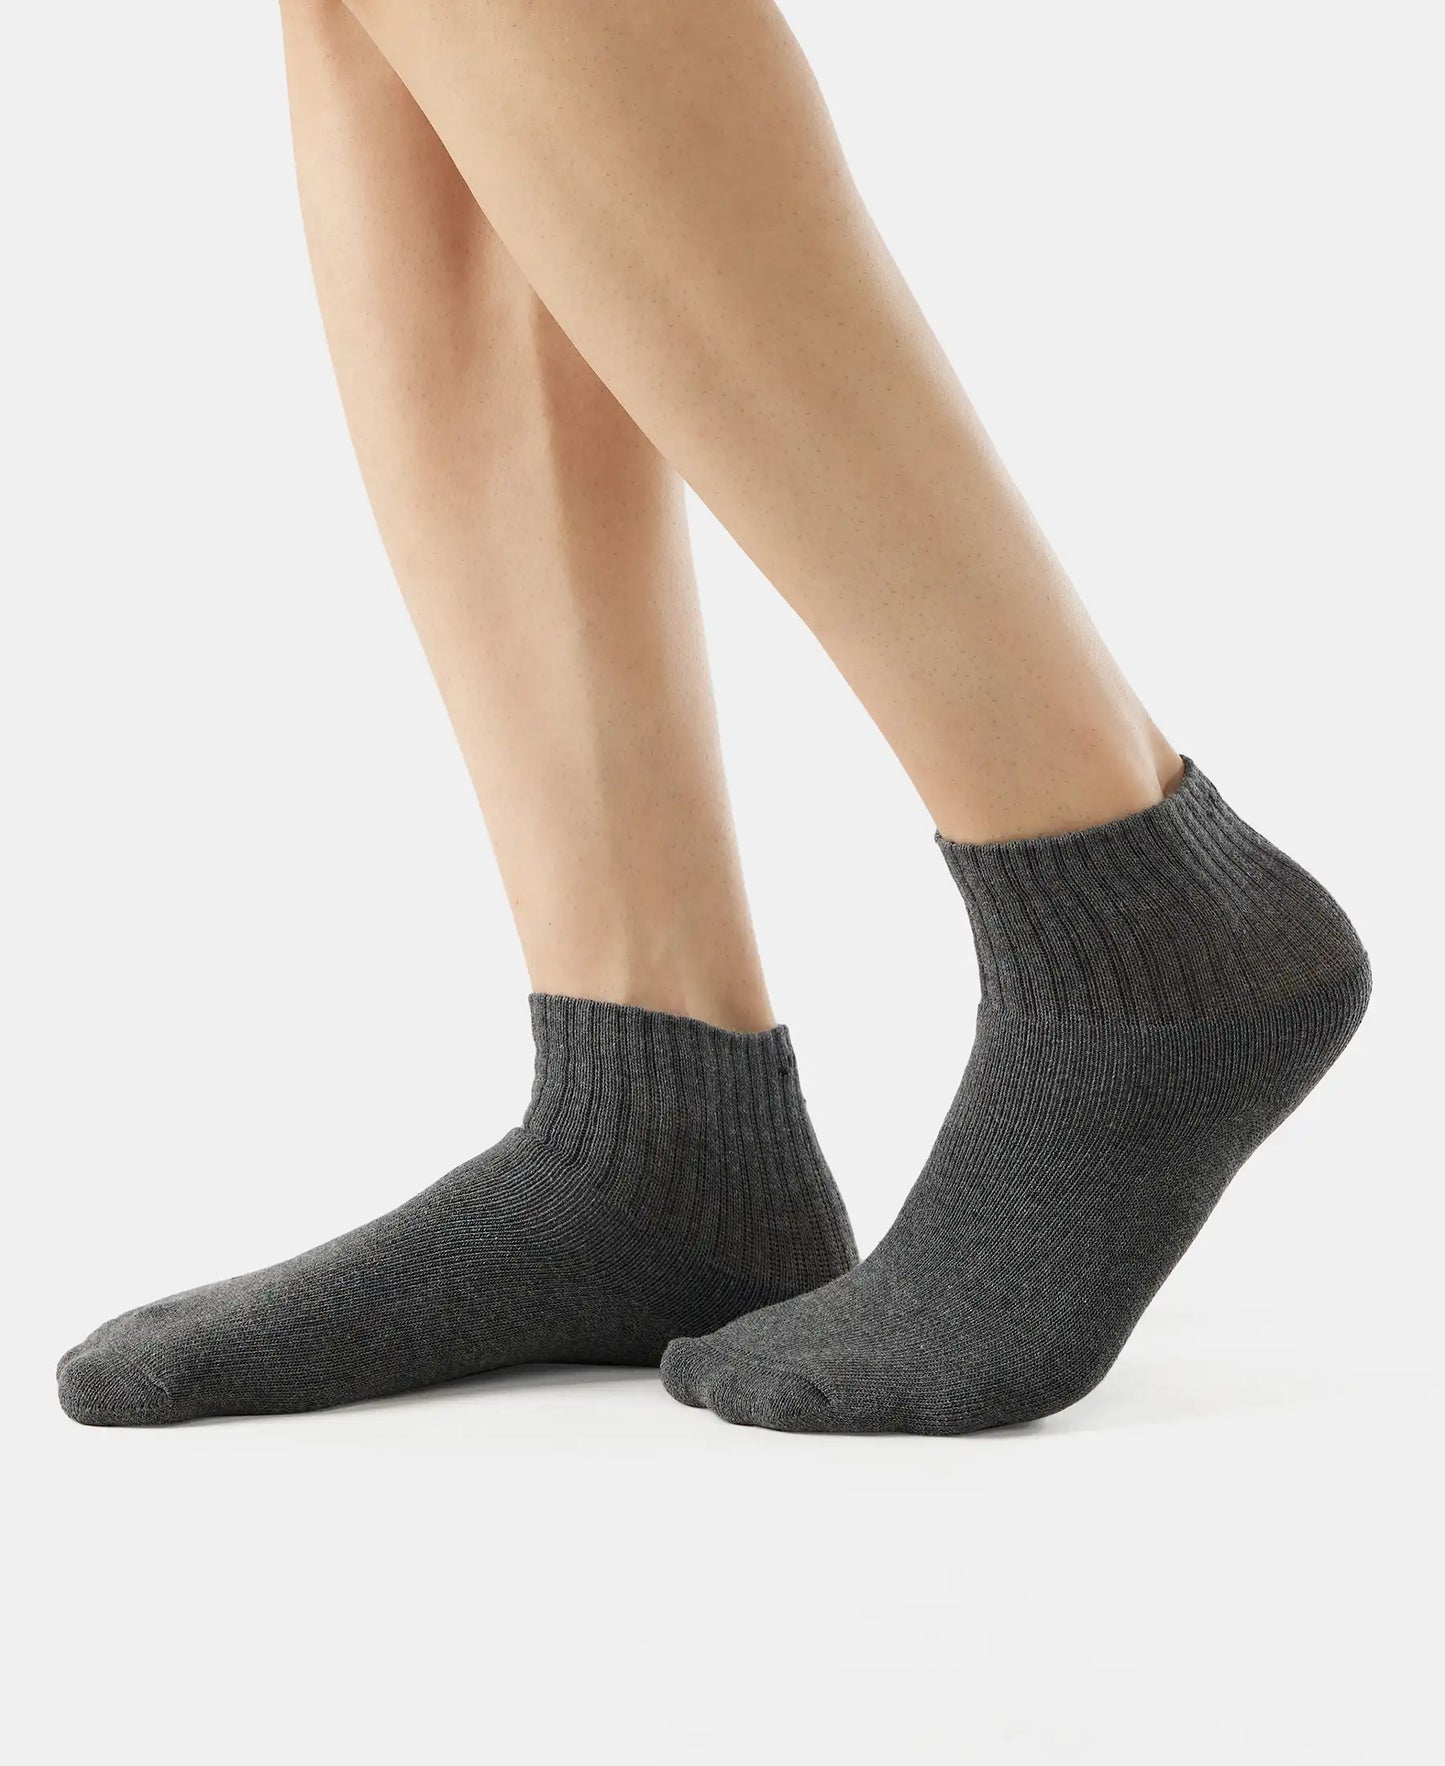 Compact Cotton Terry Ankle Length Socks With StayFresh Treatment - Black/Navy/Charcoal Melange (Pack of 3)